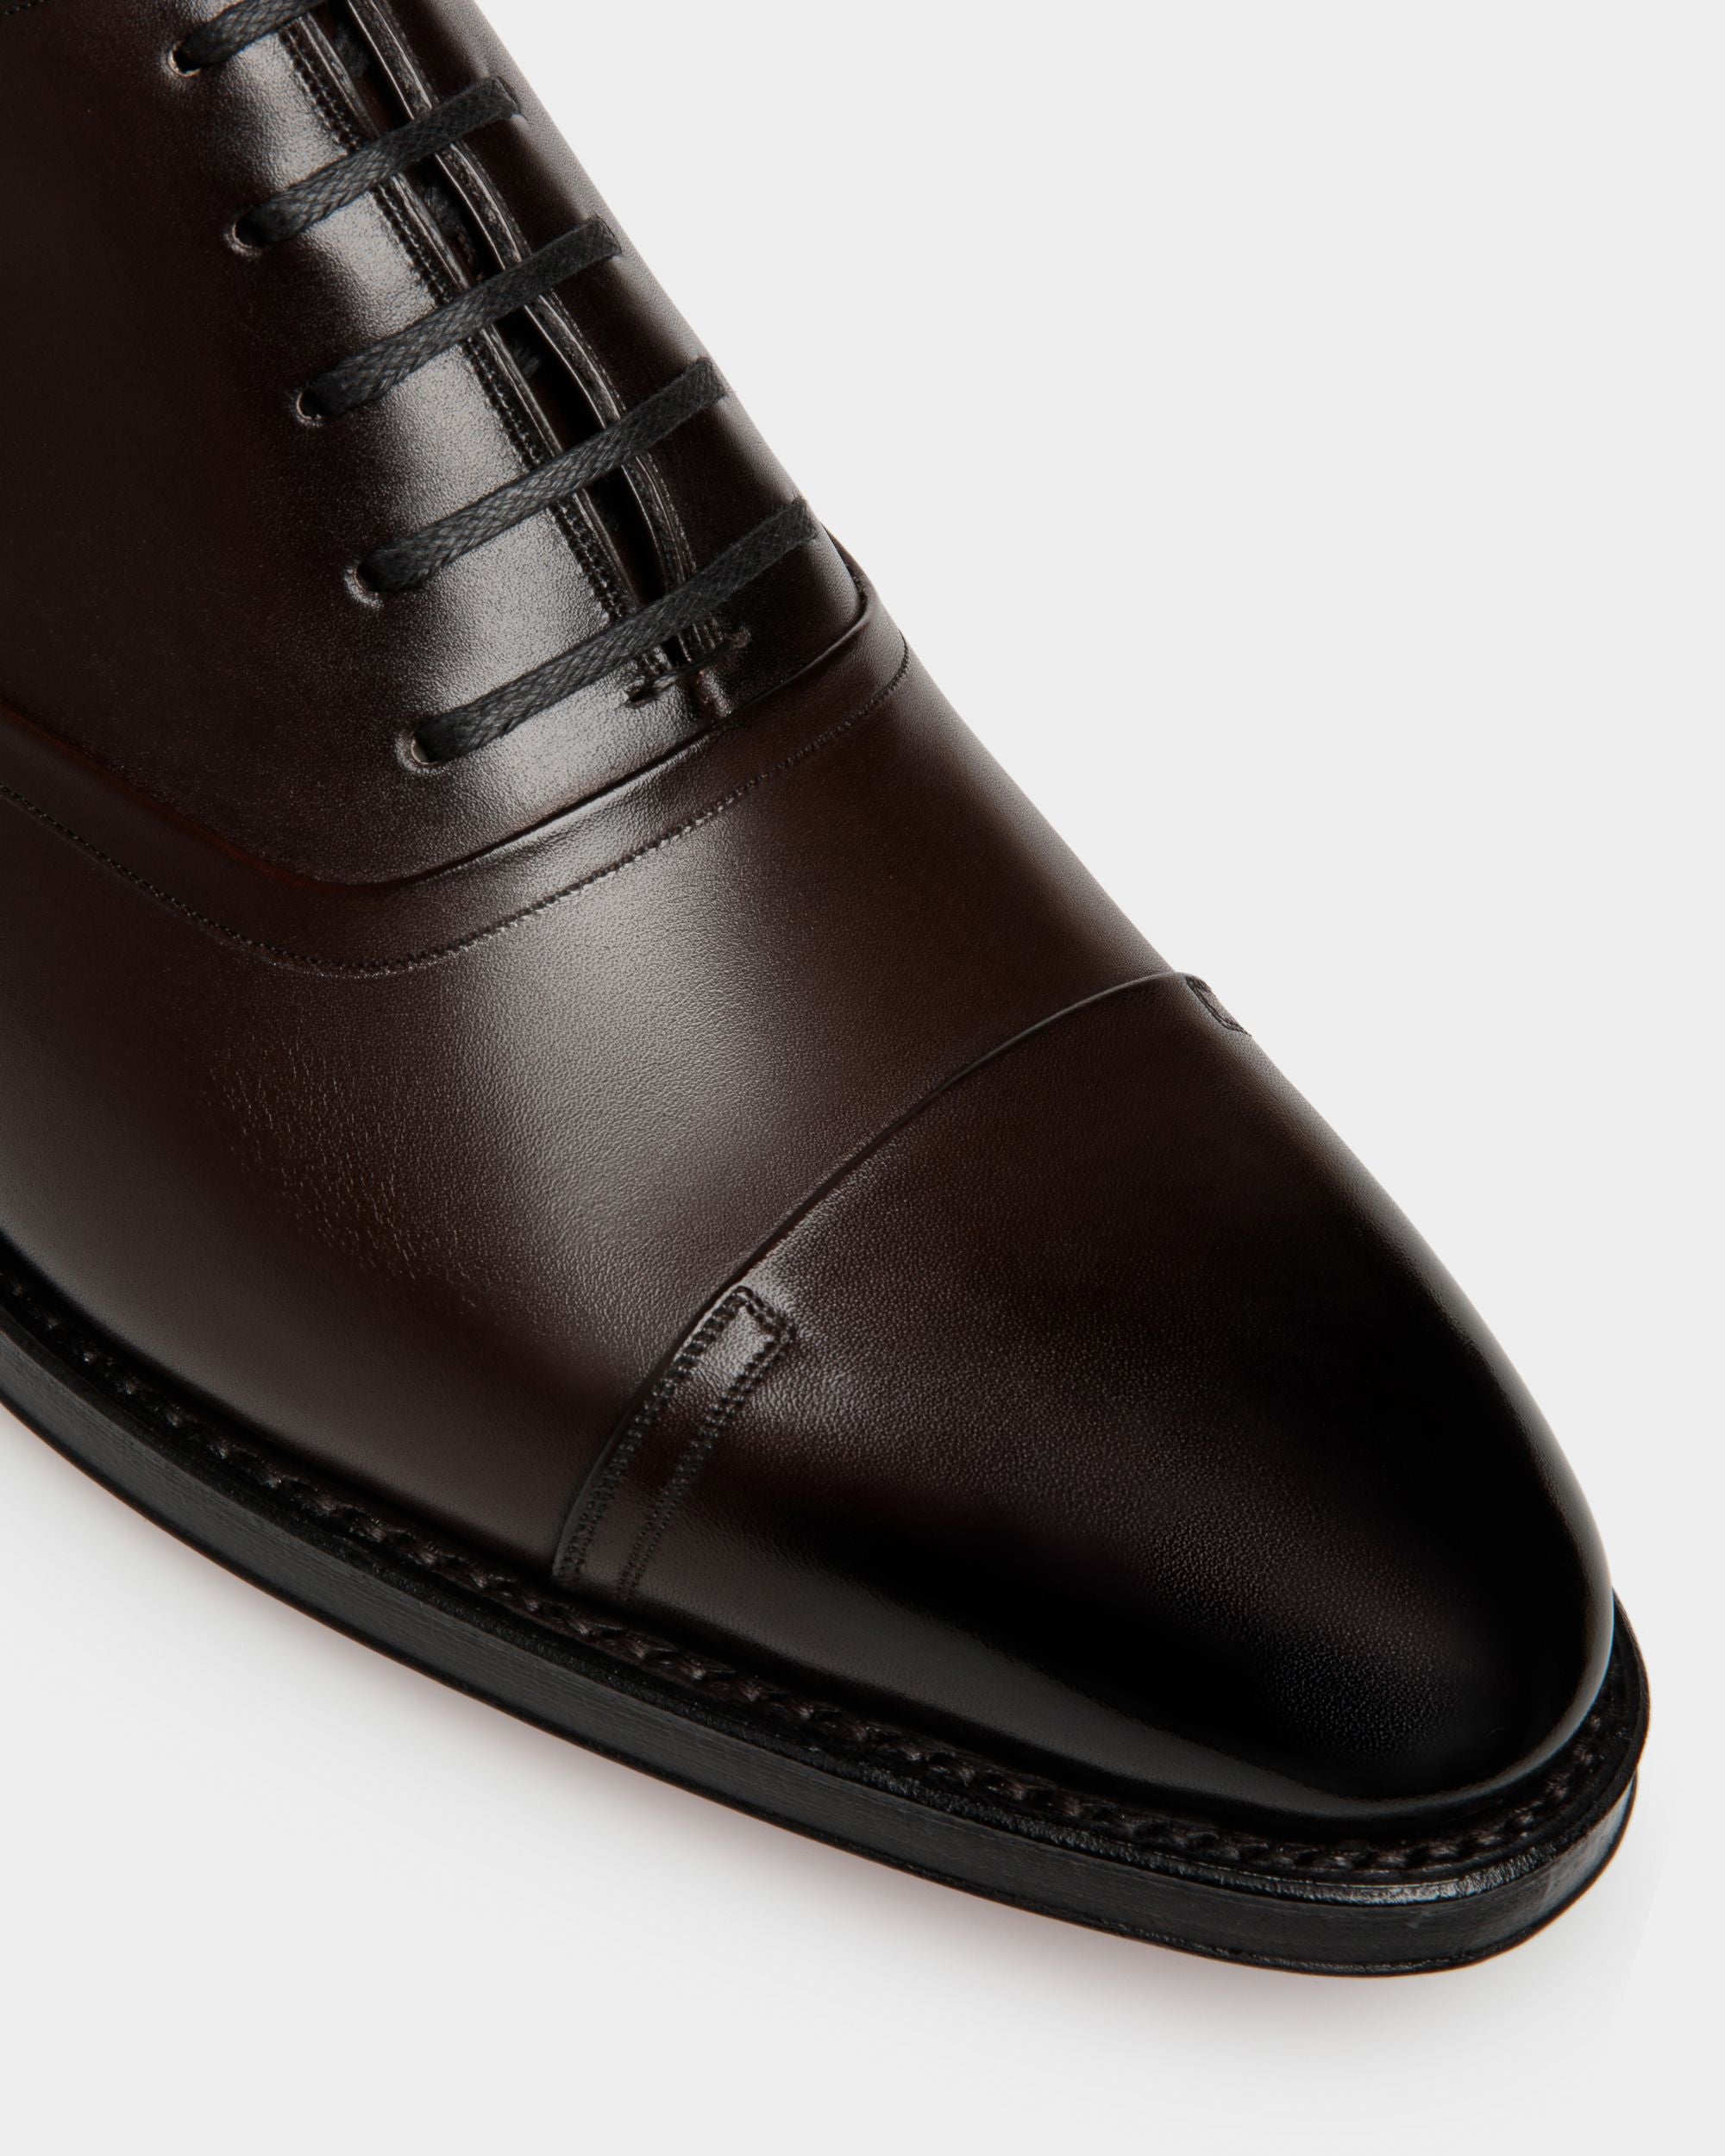 Selby | Men's Oxford Shoes | Brown Leather | Bally | Still Life Detail